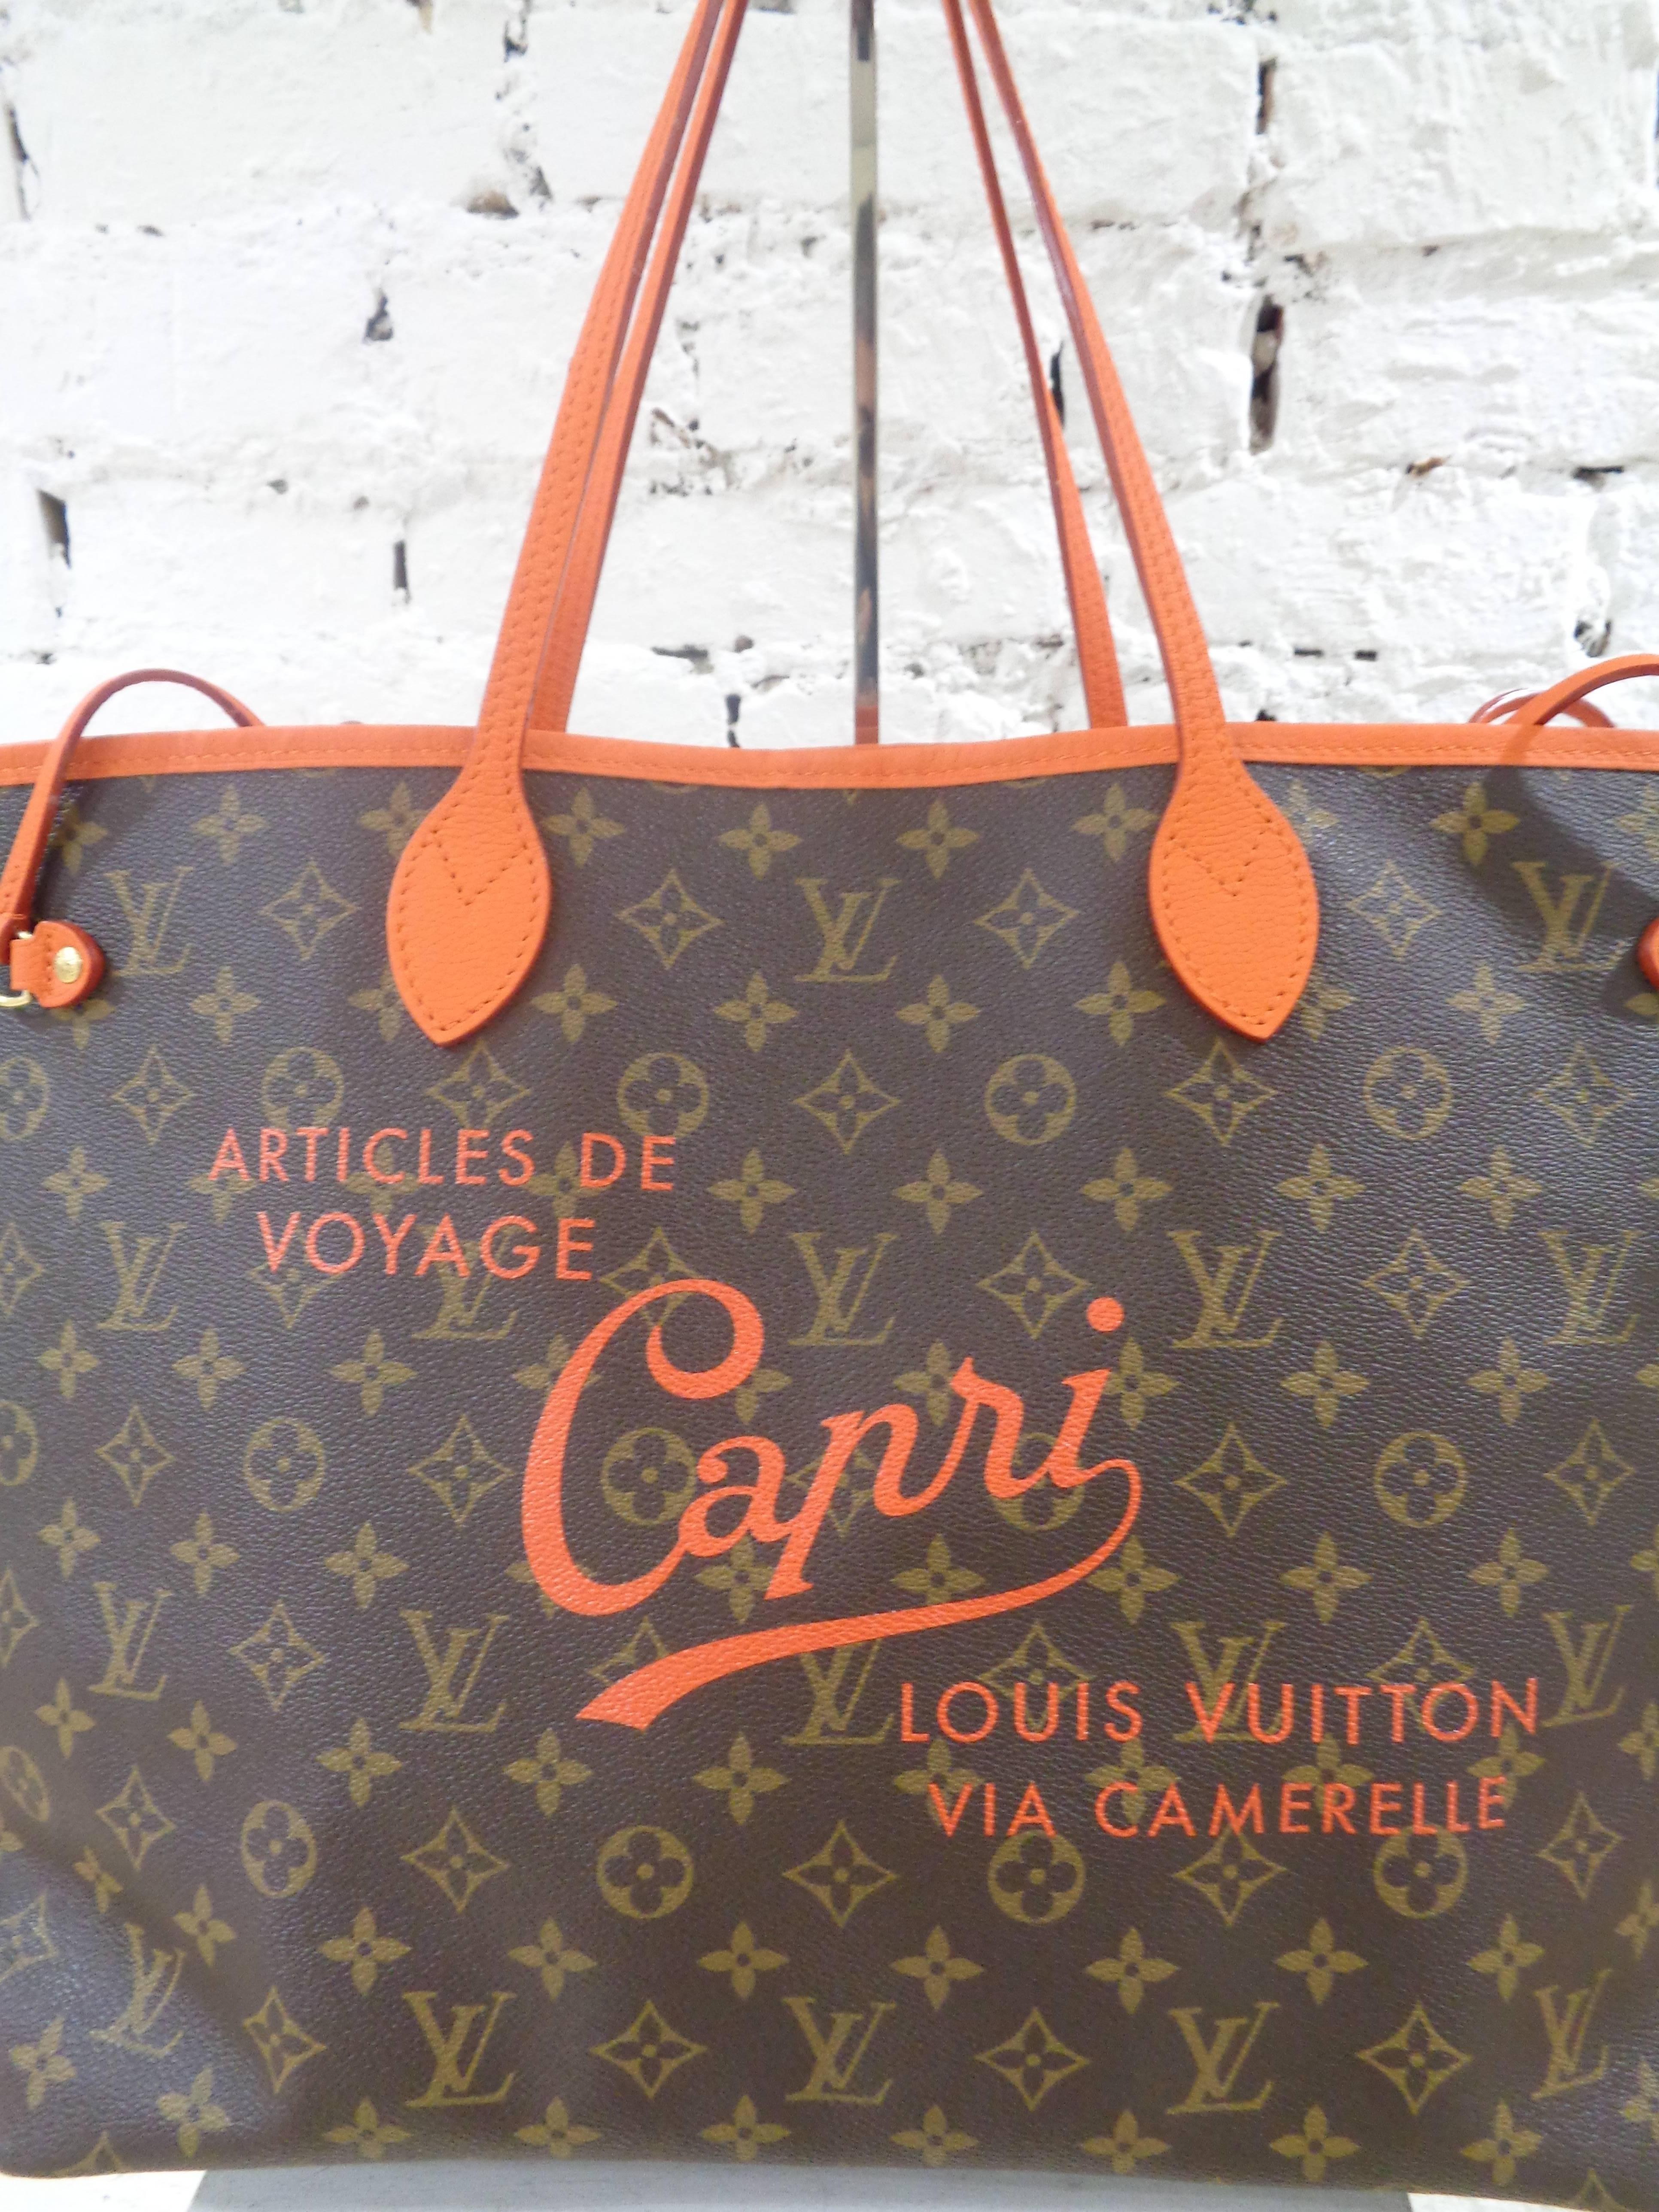 Louis Vuitton neverfull GM Ikat Capri Limited Edition

Rare and hard to find unique limited edition by Louis Vuitton for Capri.

Monogram with orange tone written totally made in france and unworn bag

code: M40987